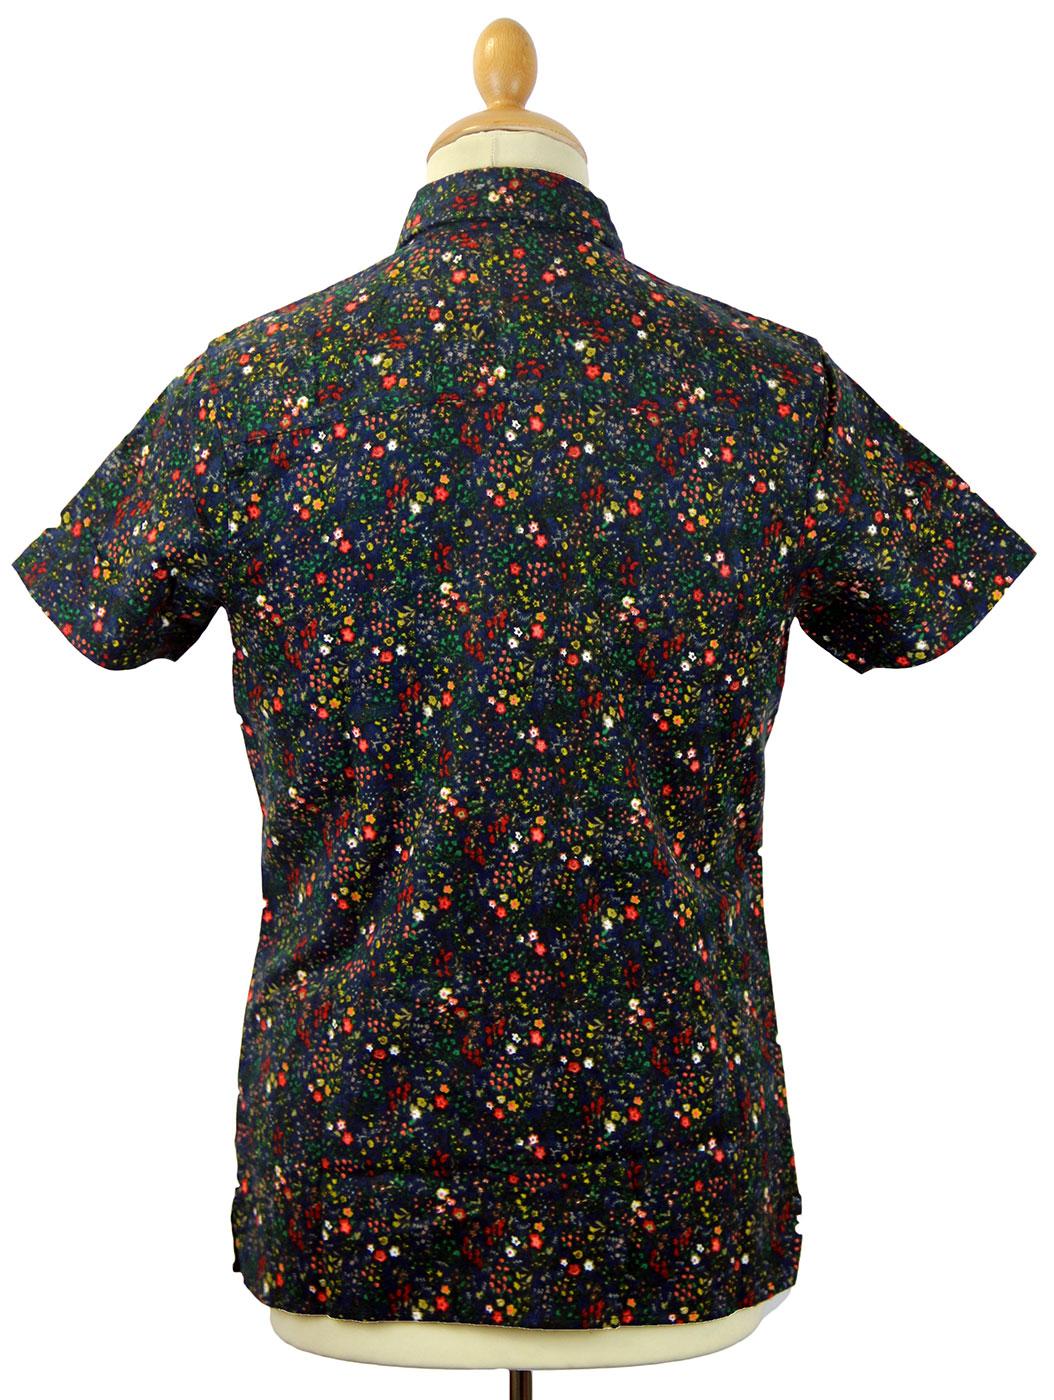 NATIVE YOUTH Retro 60s Mod Ditsy Floral Brushed Cotton Shirt